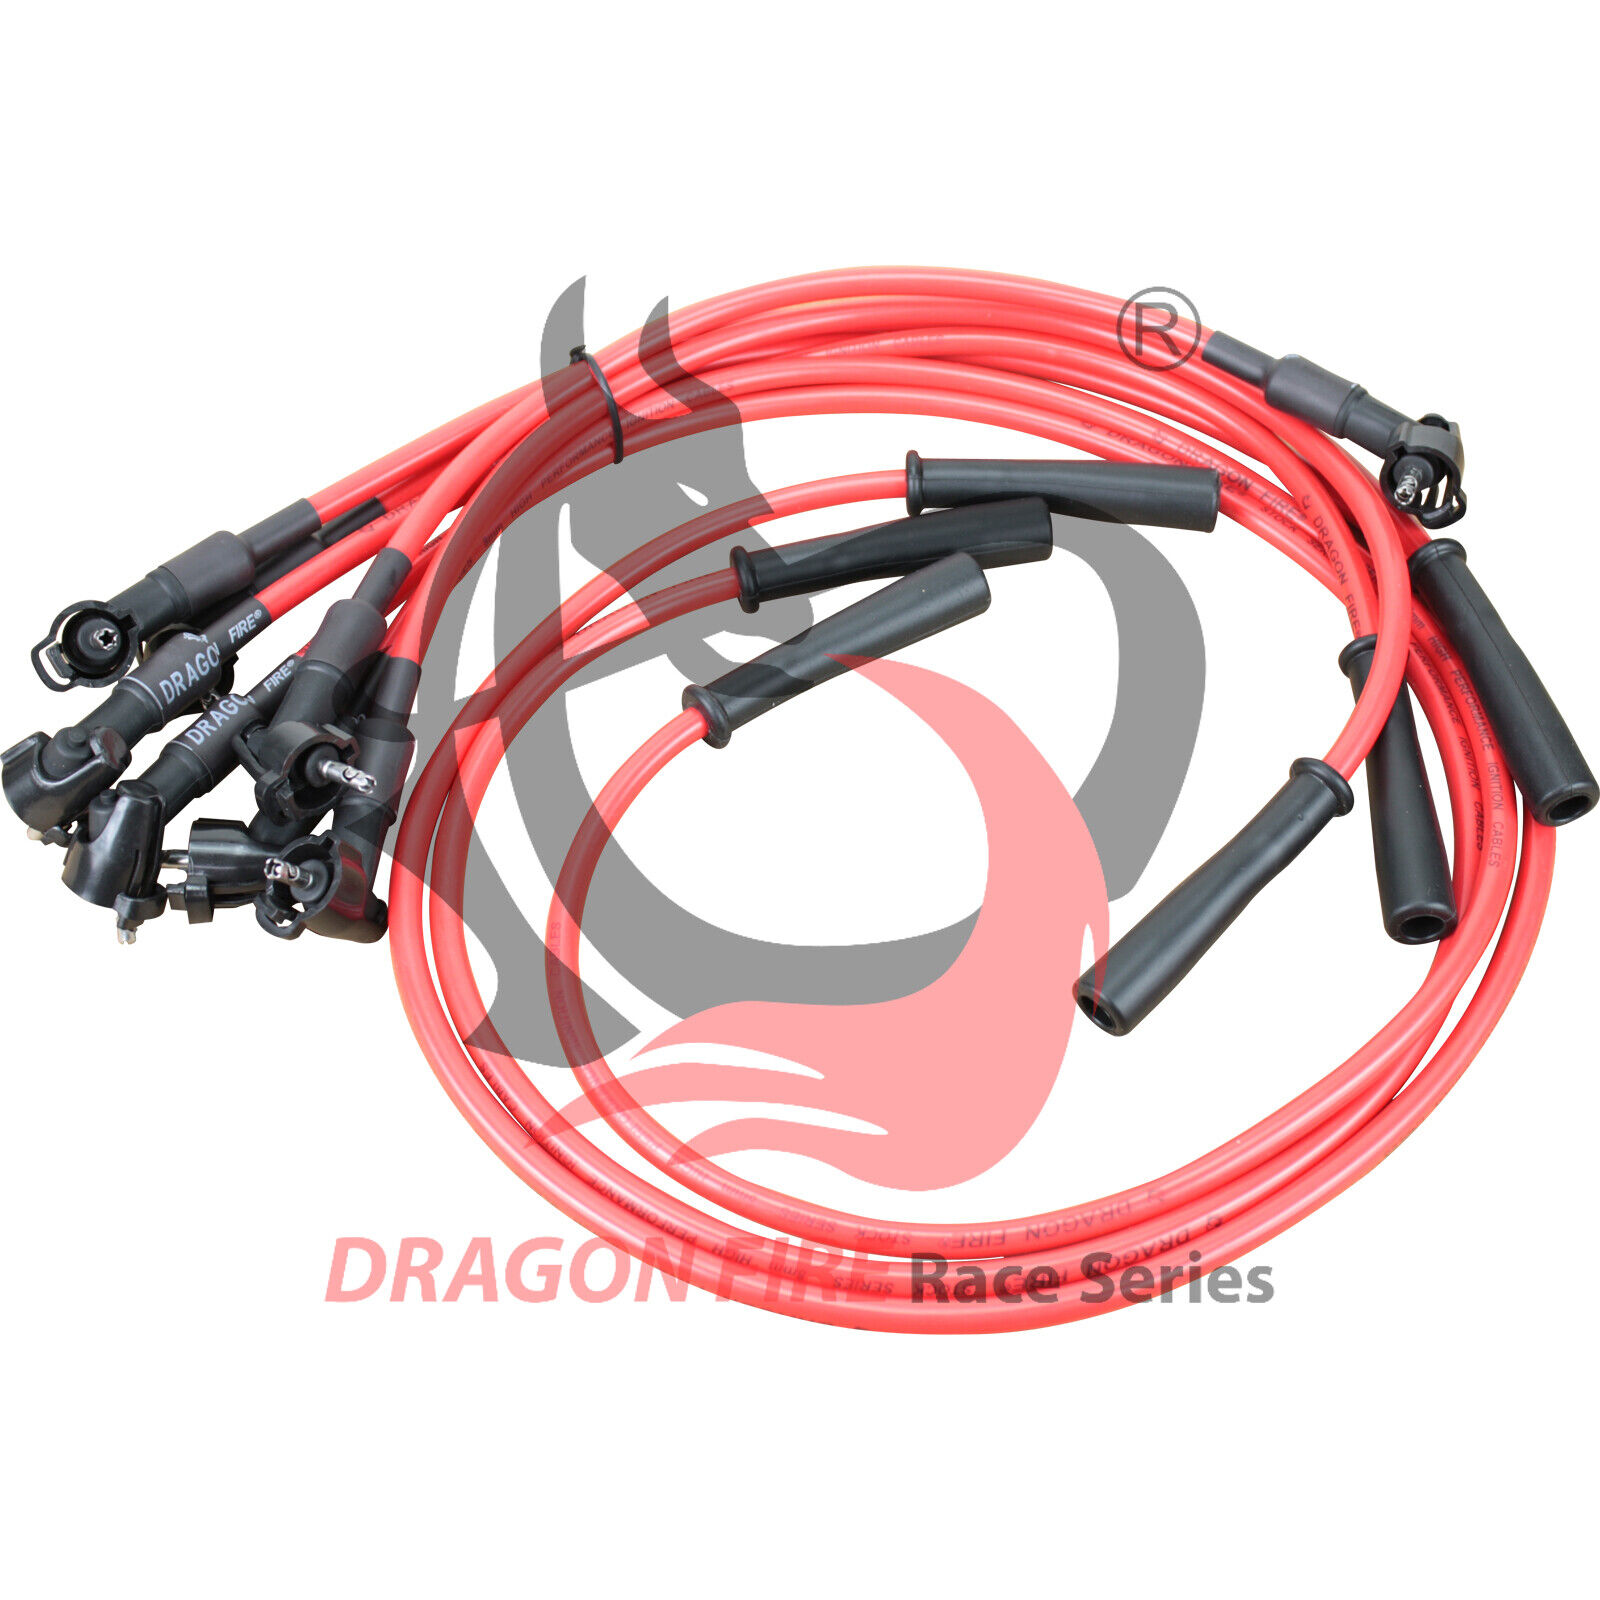 Dragon Fire Low Ohm Plug Wire Set For 1992-95 Toyota 4Runner Pickup T100 3.0L V6